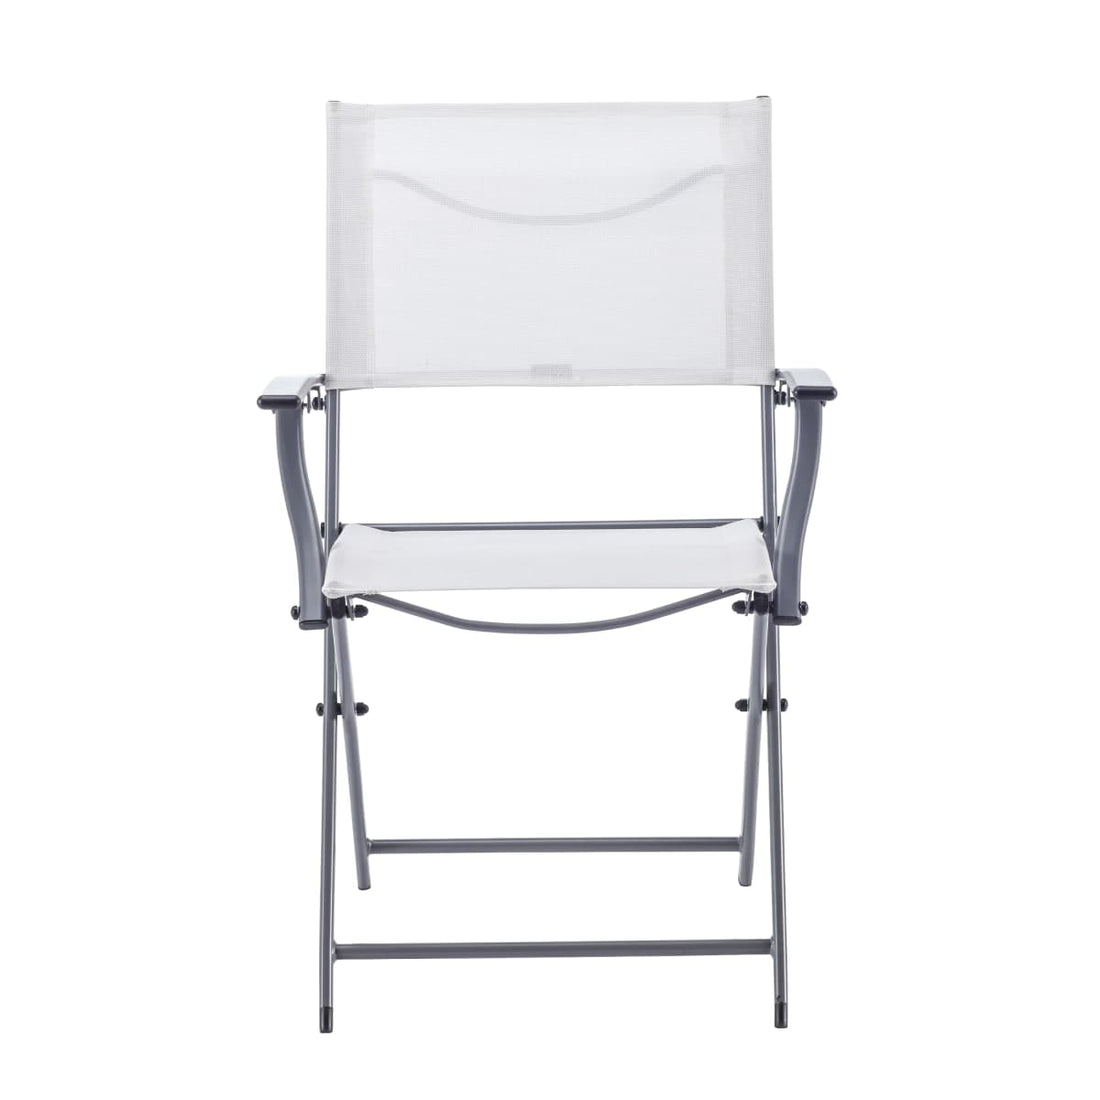 EMYS NATERIAL FOLDING STEEL CHAIR WITH ARMRESTS TEXTILENE SEAT 52X54XH83 - best price from Maltashopper.com BR500009541